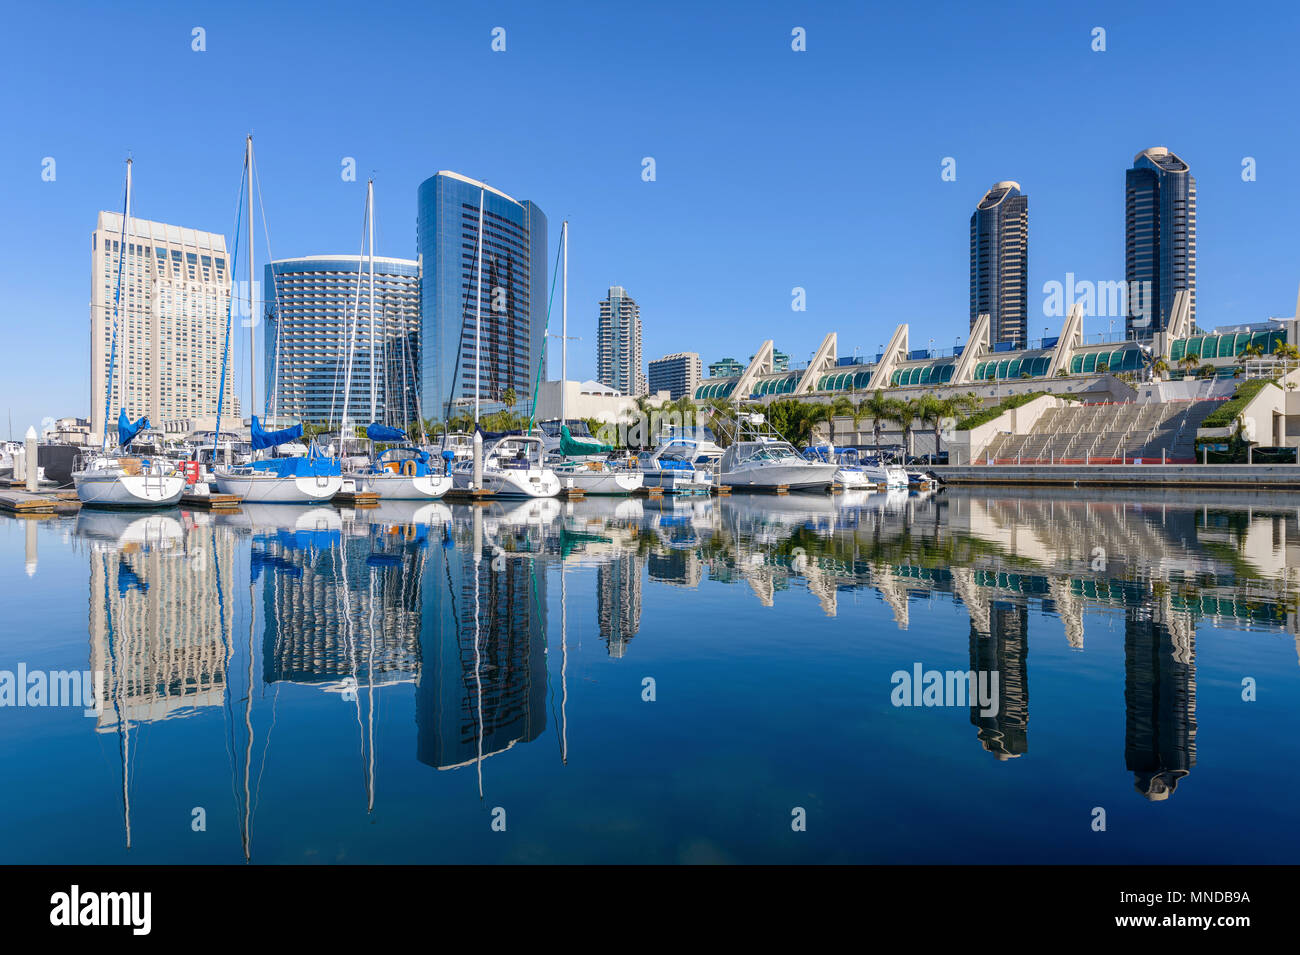 San Diego Marina - A panoramic morning view of San Diego Marina, surrounded by modern high-rising buildings, at side of San Diego Bay. San Diego, CA. Stock Photo